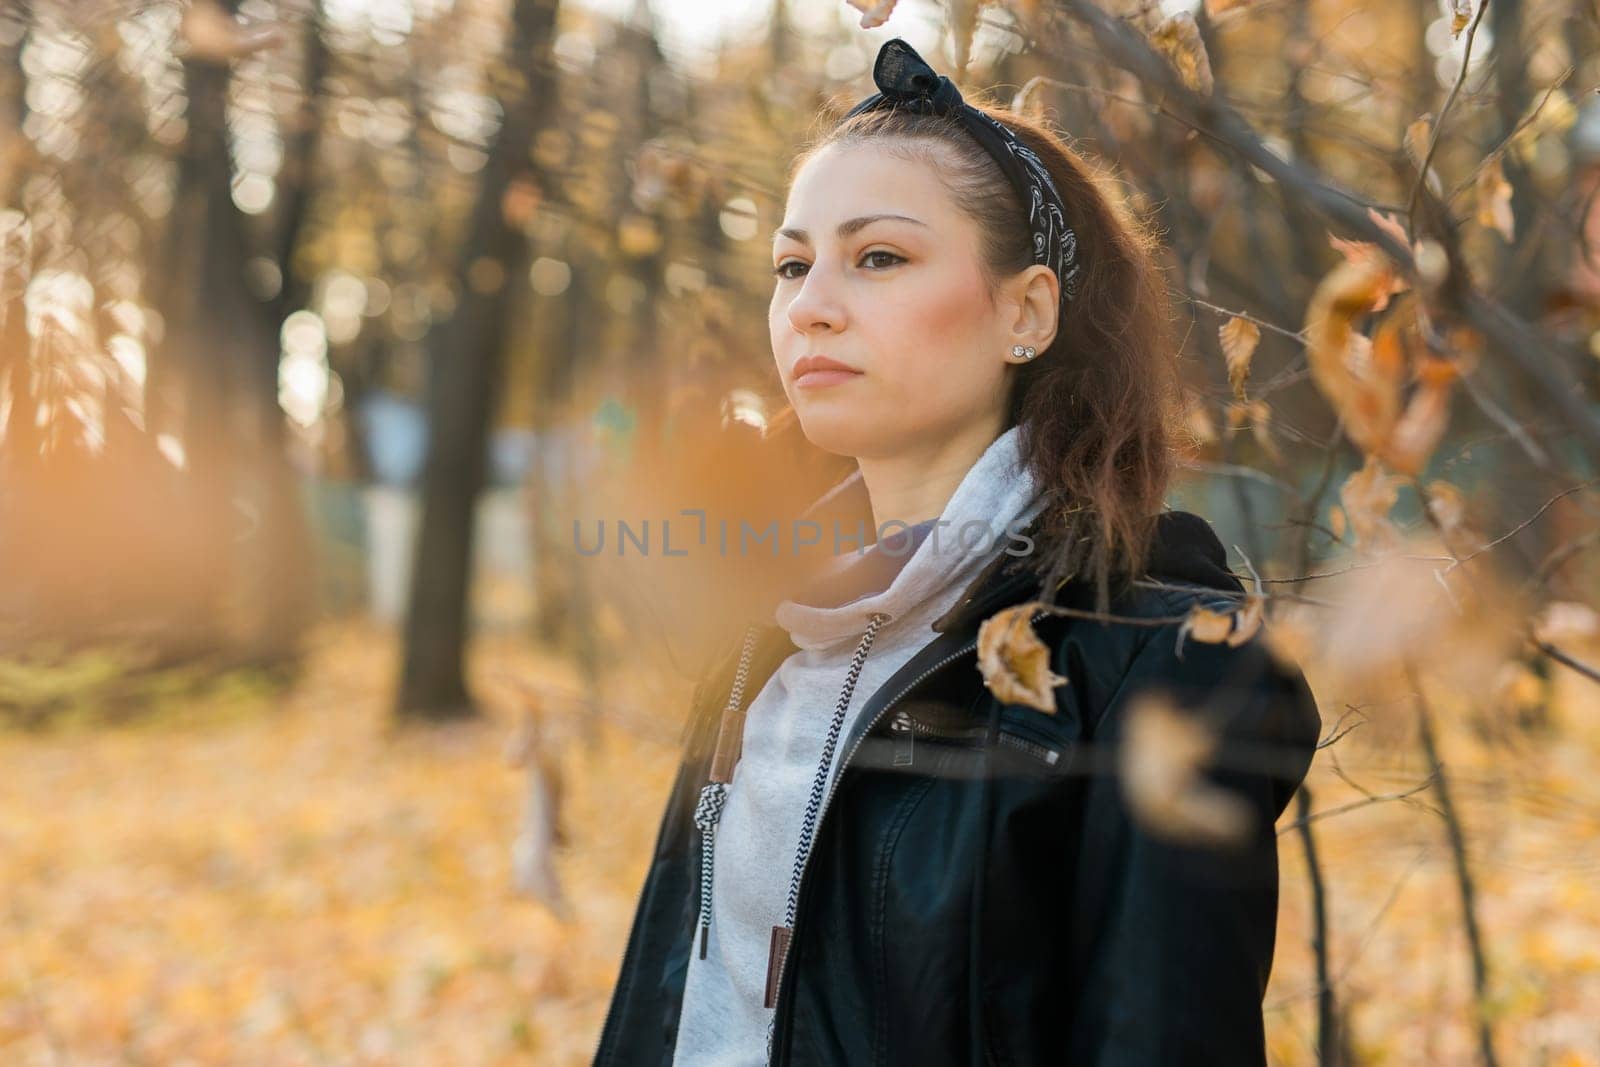 Outdoor atmospheric lifestyle portrait of young beautiful young woman copy space. Warm autumn fall season. Millennial generation and youth by Satura86